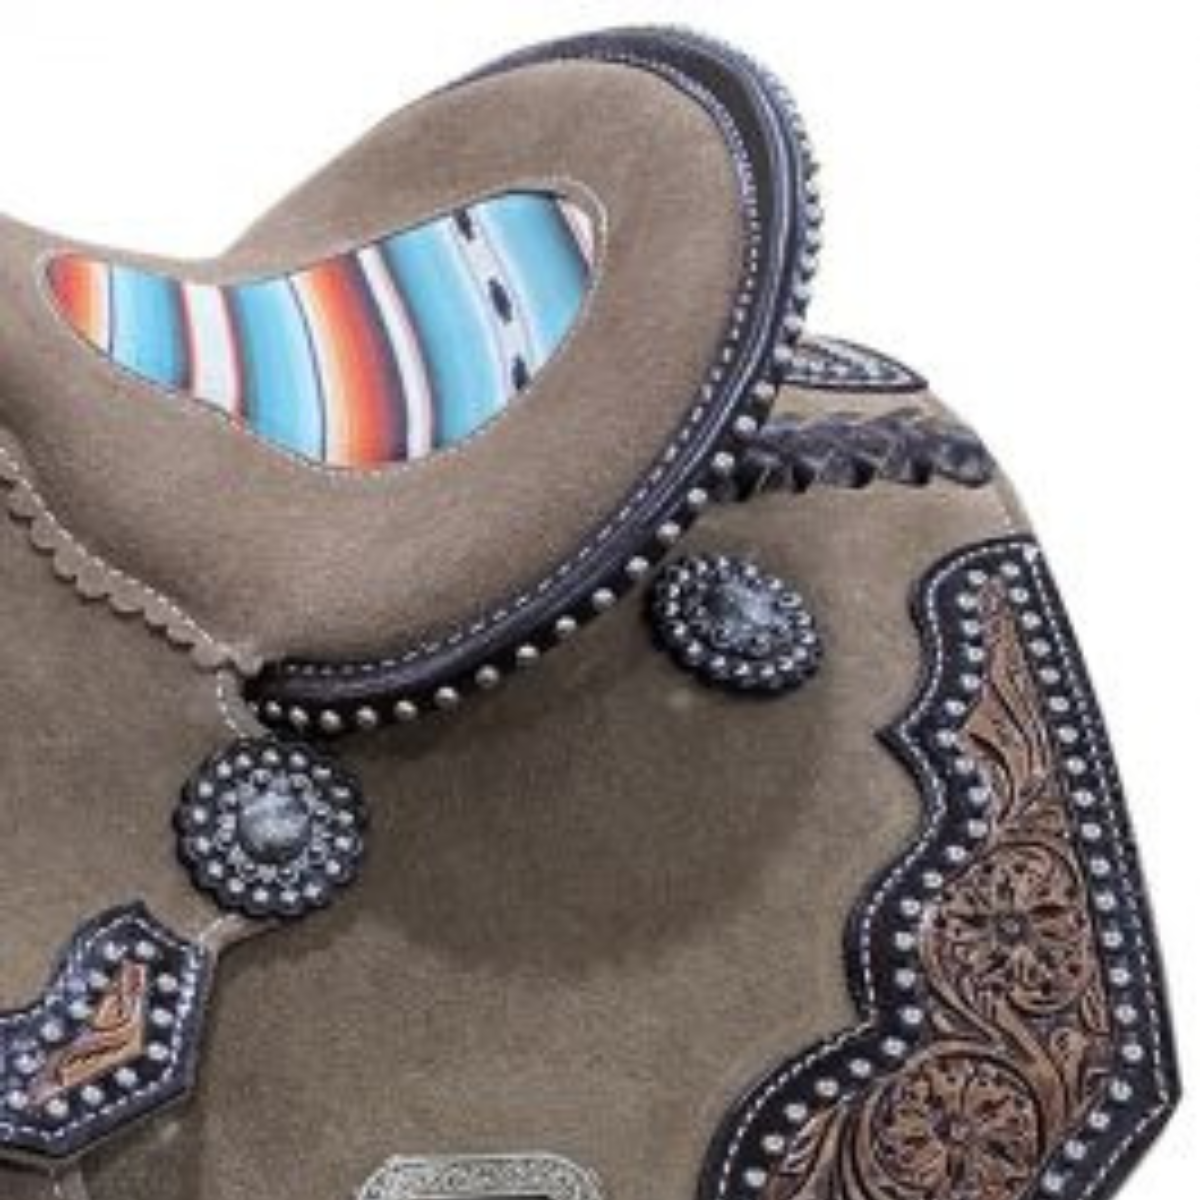 12" DOUBLE T ROUGH OUT BARREL STYLE SADDLE WITH SOUTHWEST SERAPE PRINTED INLAY - Double T Saddles